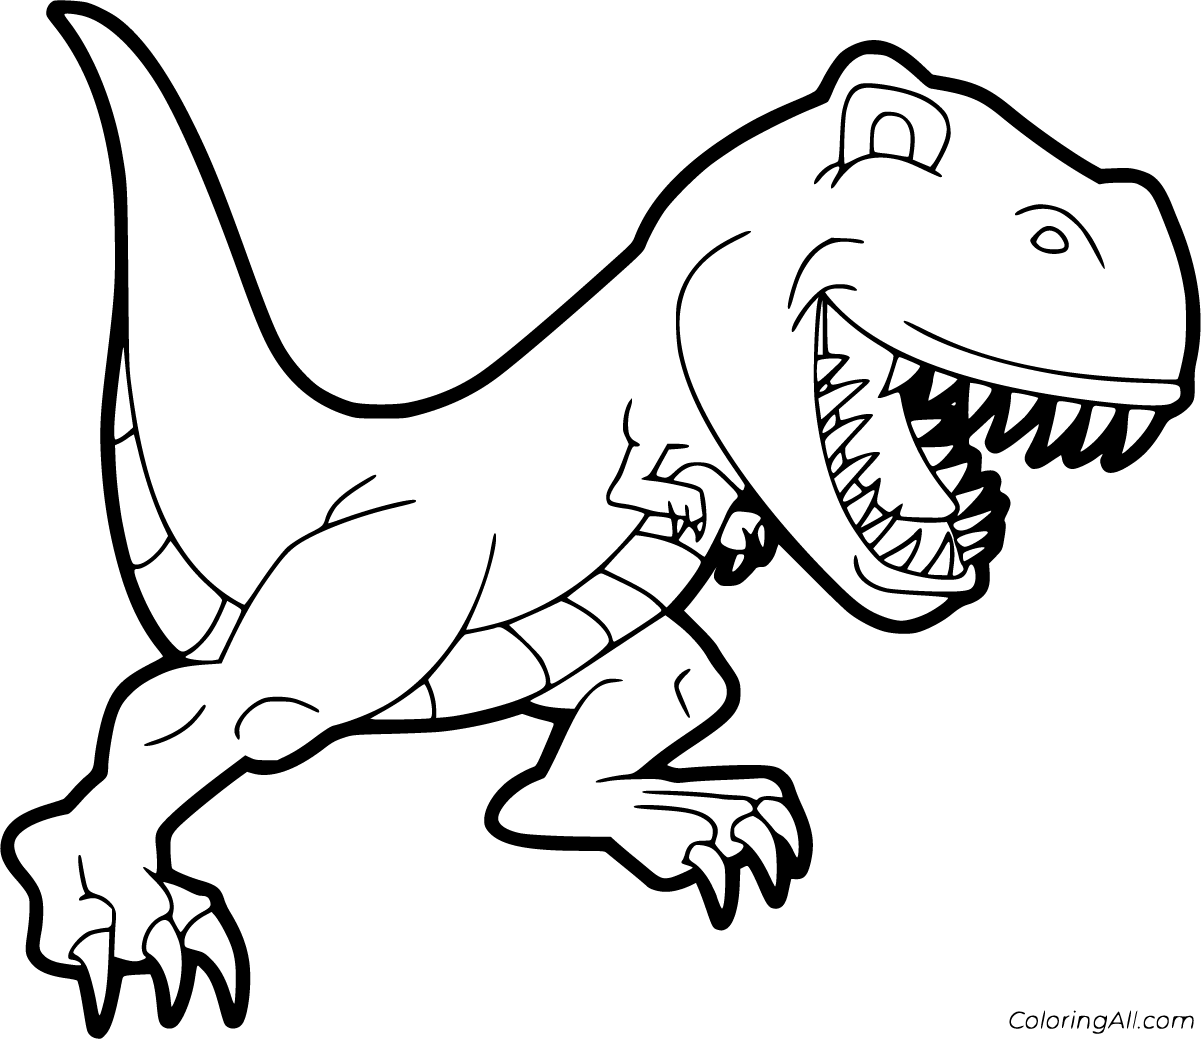 T Rex Coloring Pages   ColoringAll